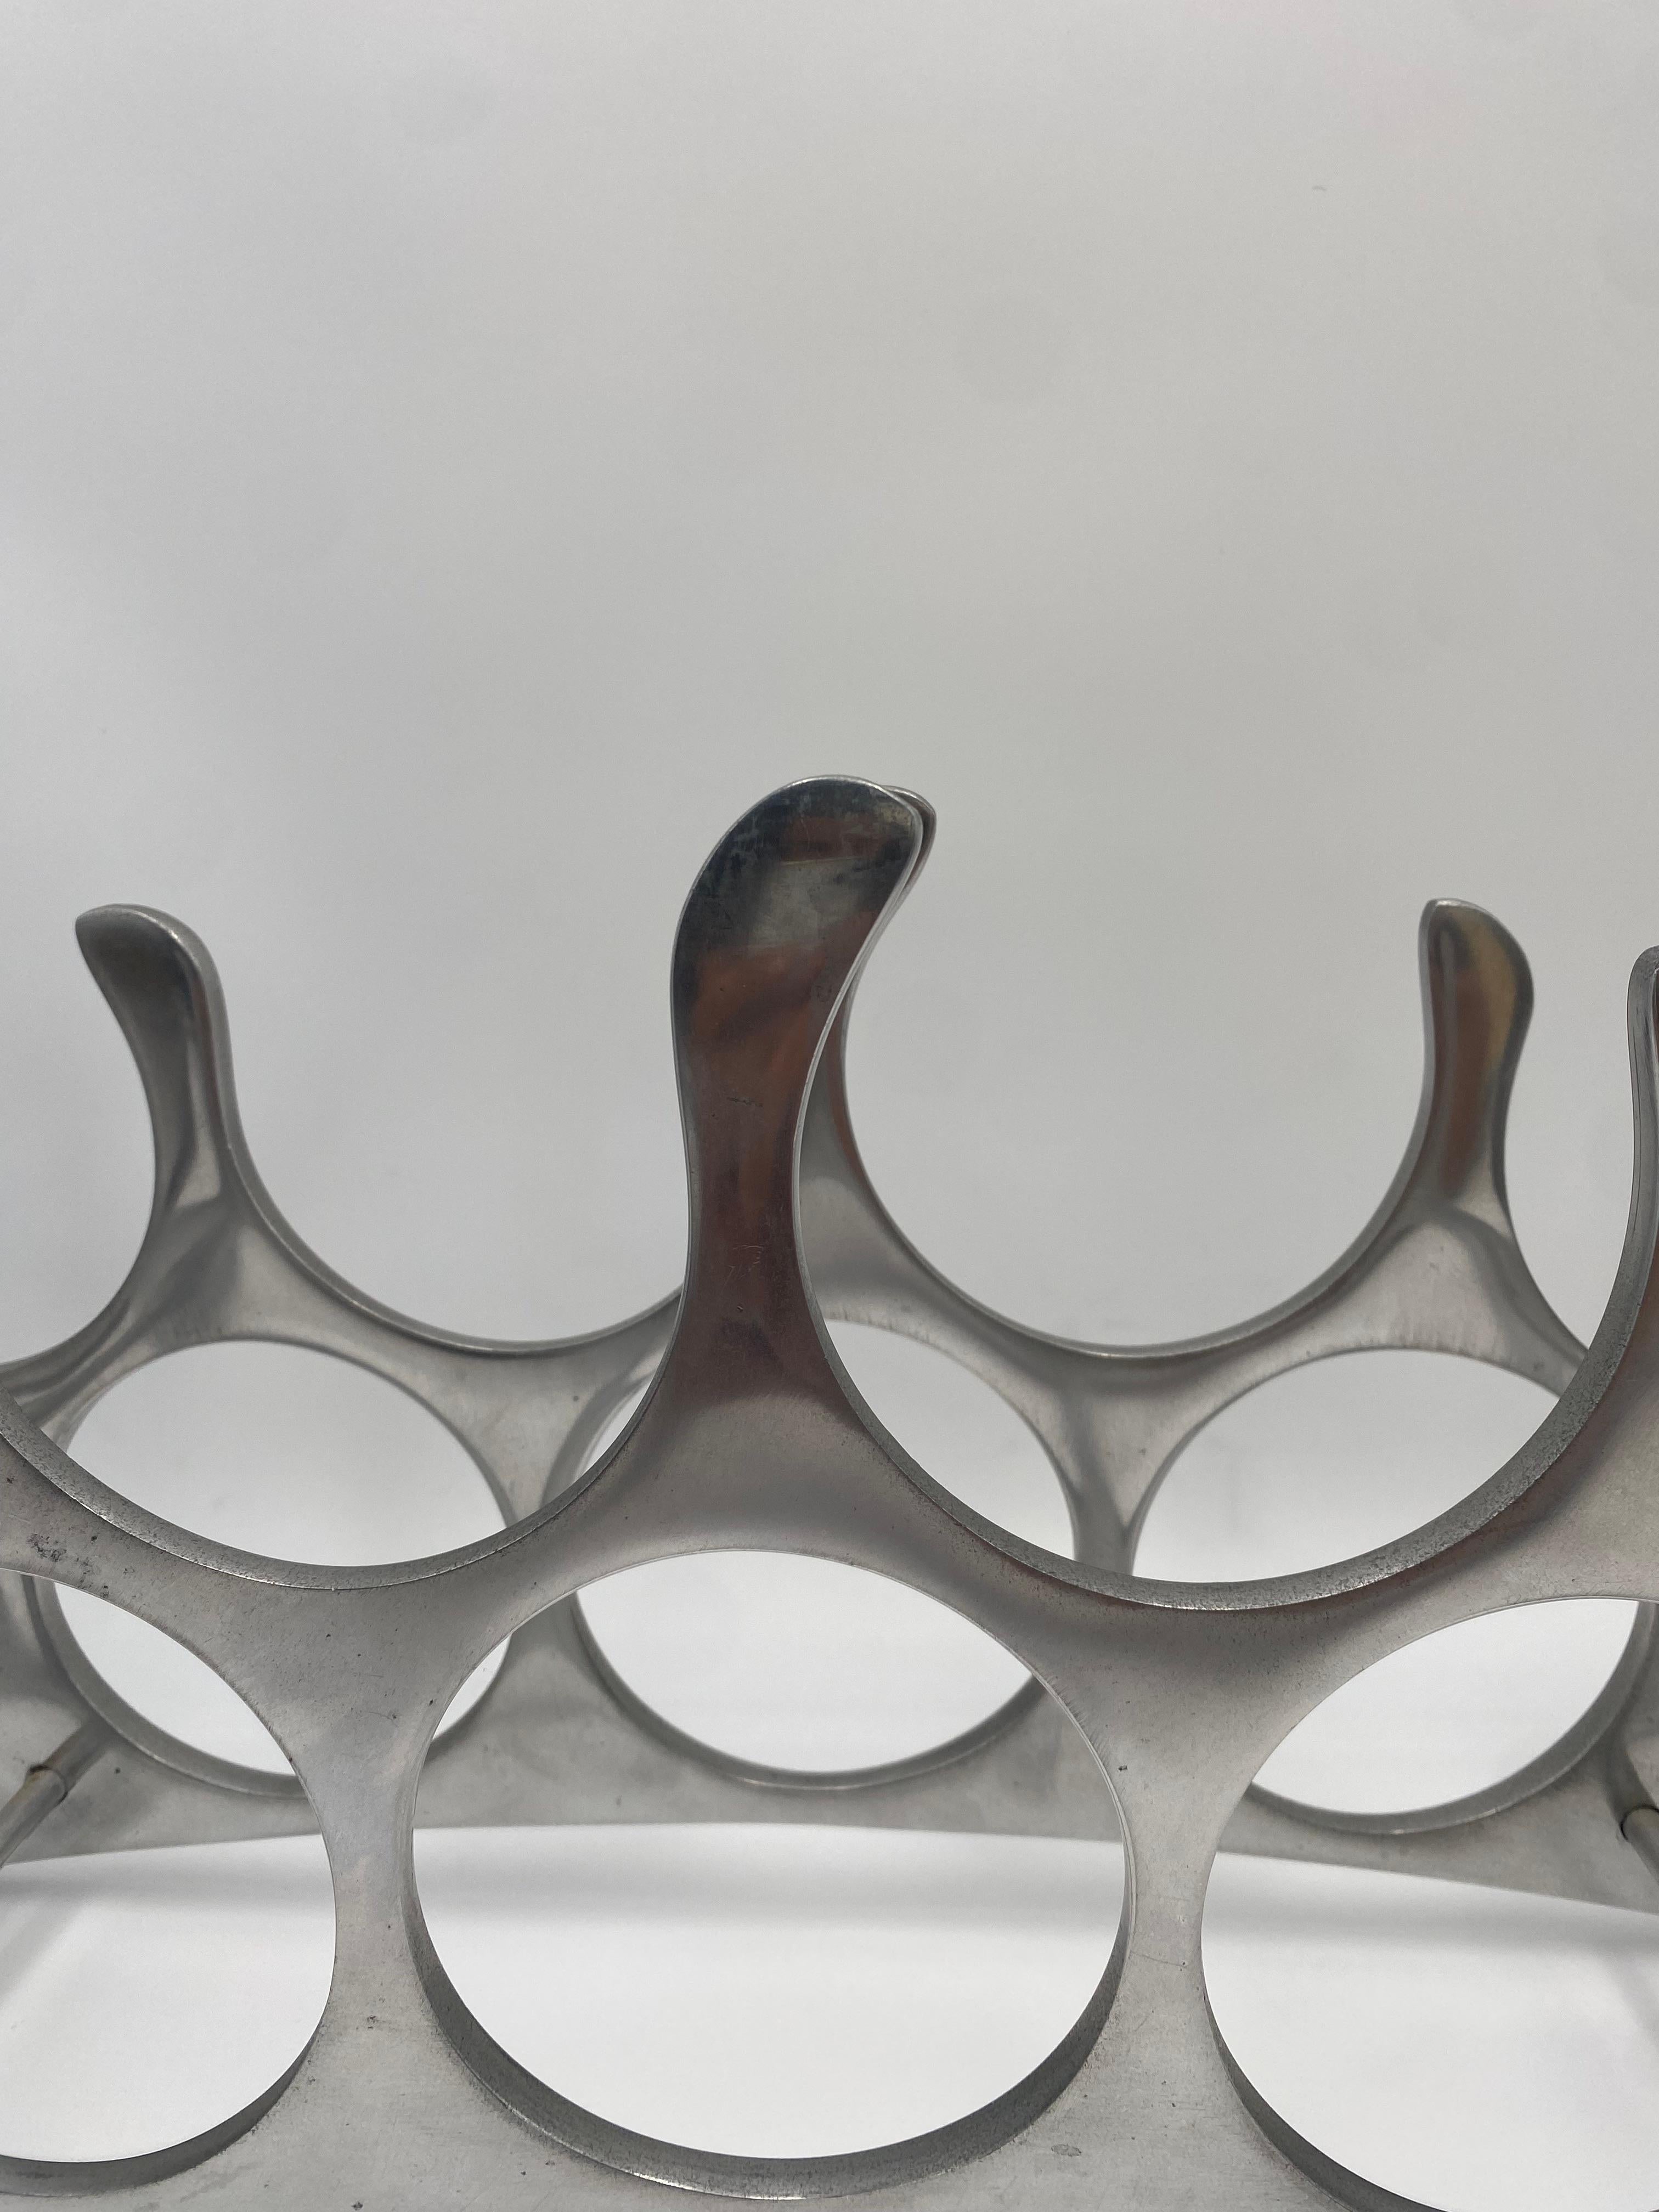 Hand-Crafted 9 Bottle Polished Aluminum Wine Rack By Michael Noll,  Germany 1990s For Sale